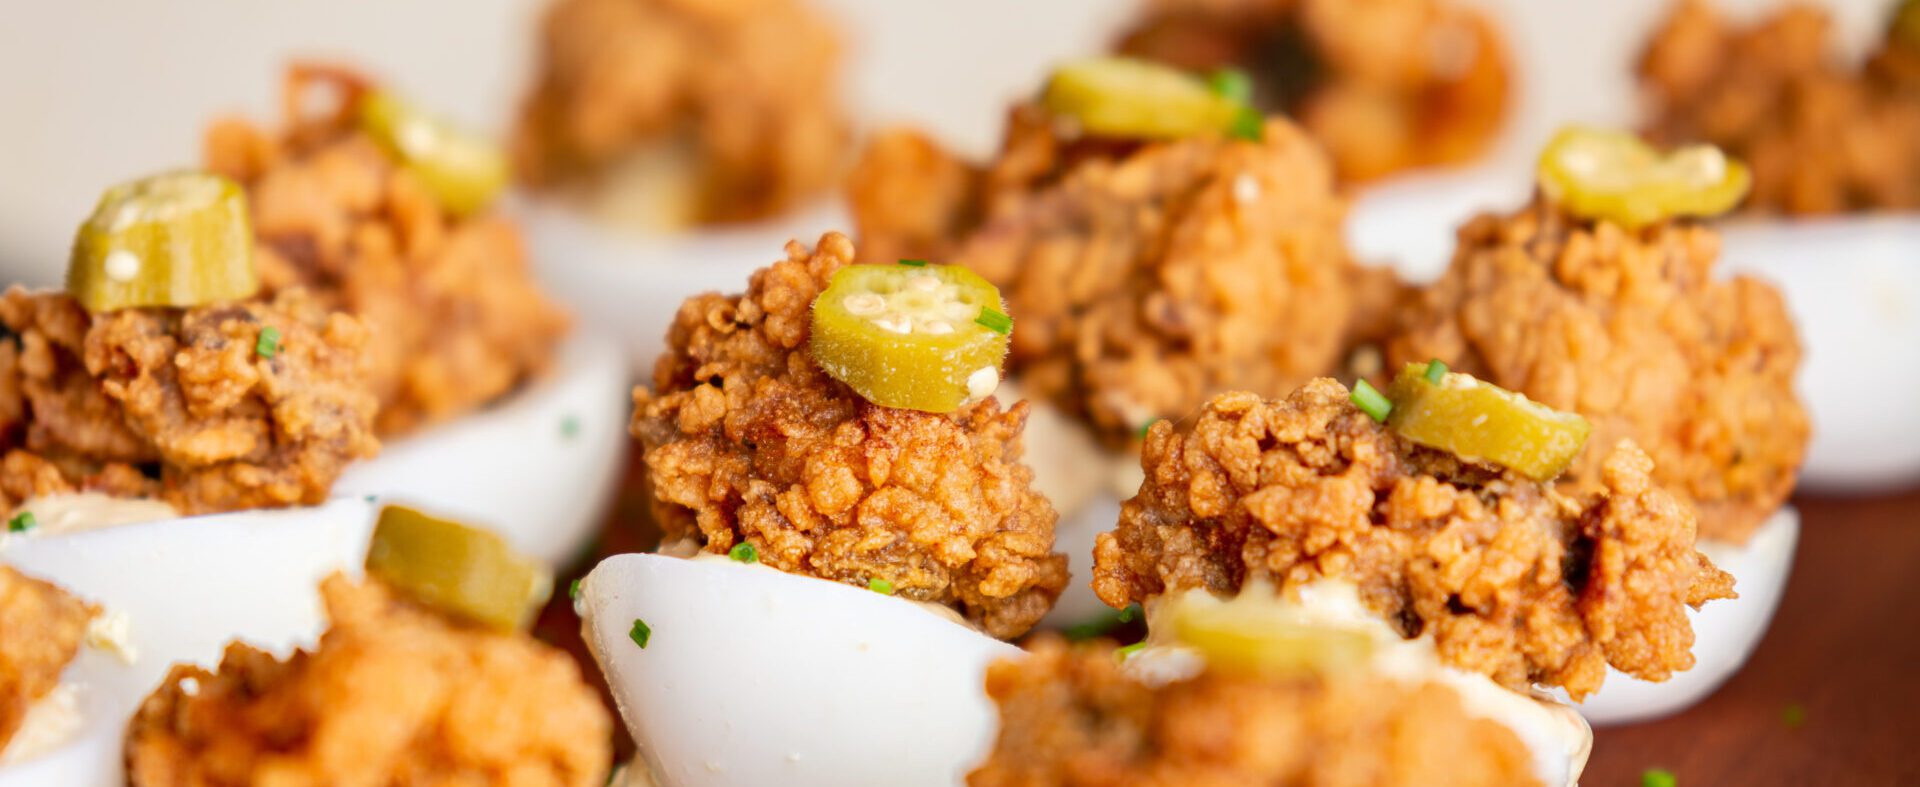 Fried oyster deviled eggs